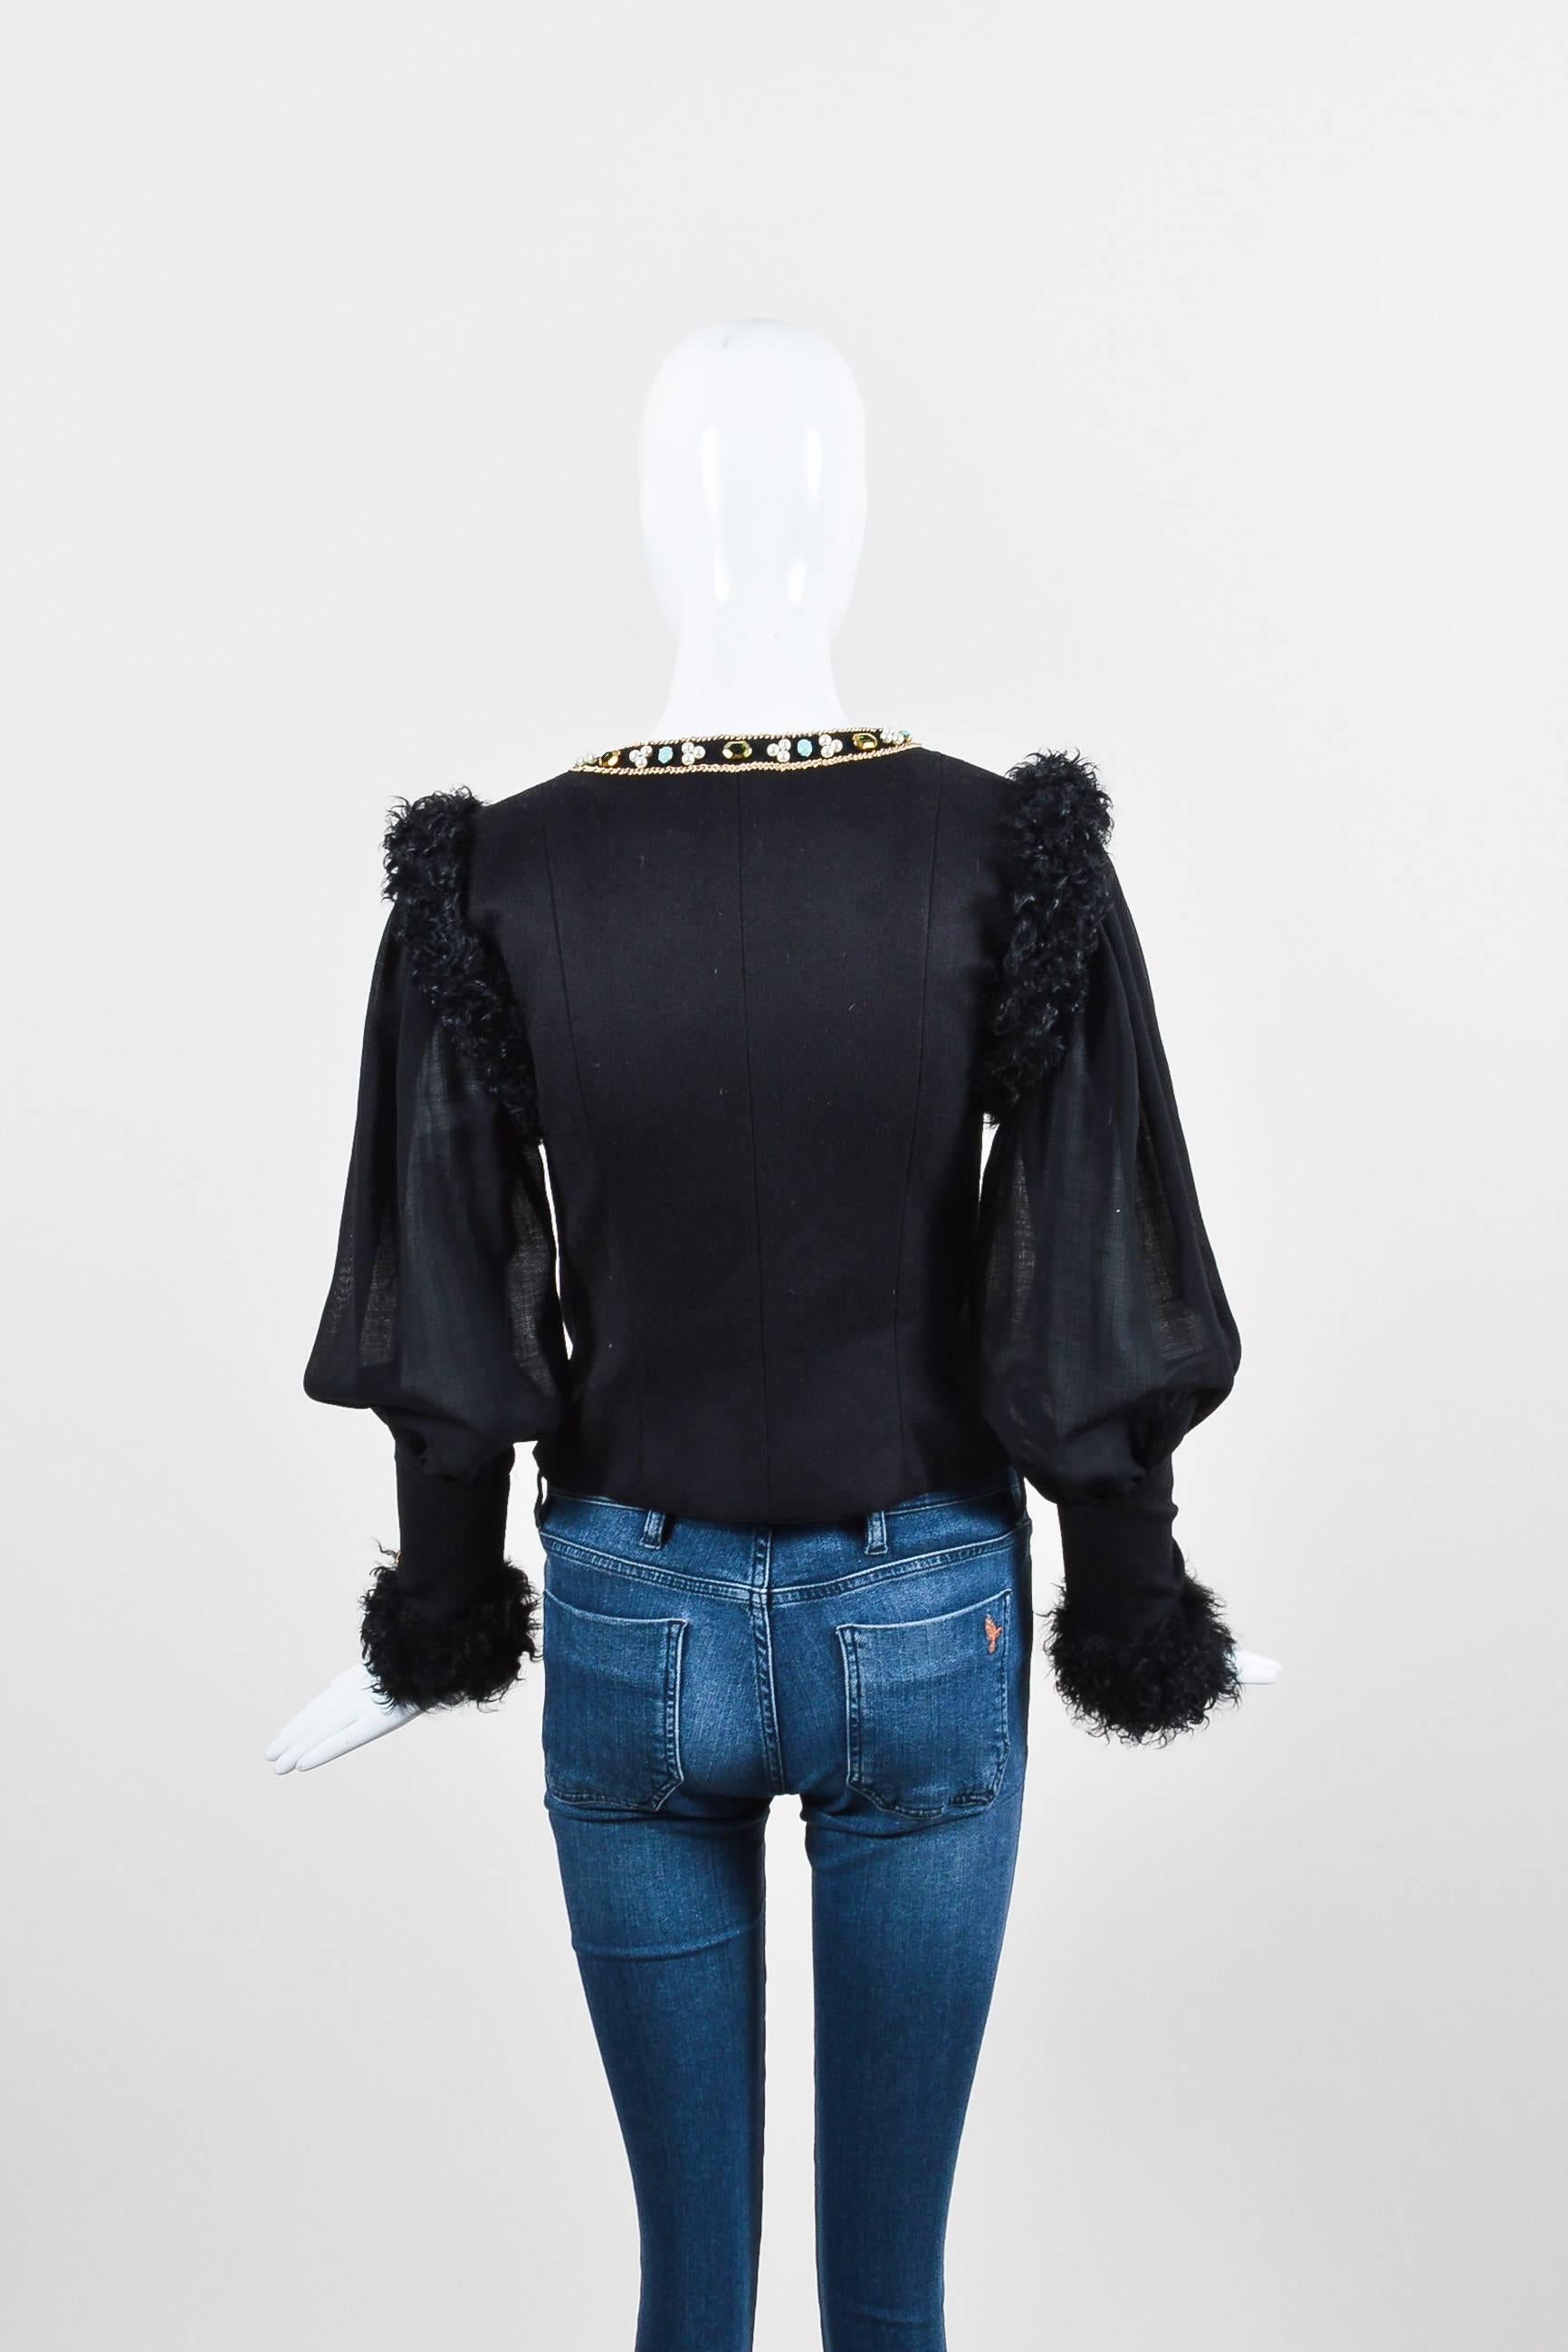 ﻿Chanel 09A Black Multi Cashmere Lamb Fur Trim Bead Embellished LS Jacket SZ 38 In Good Condition For Sale In Chicago, IL